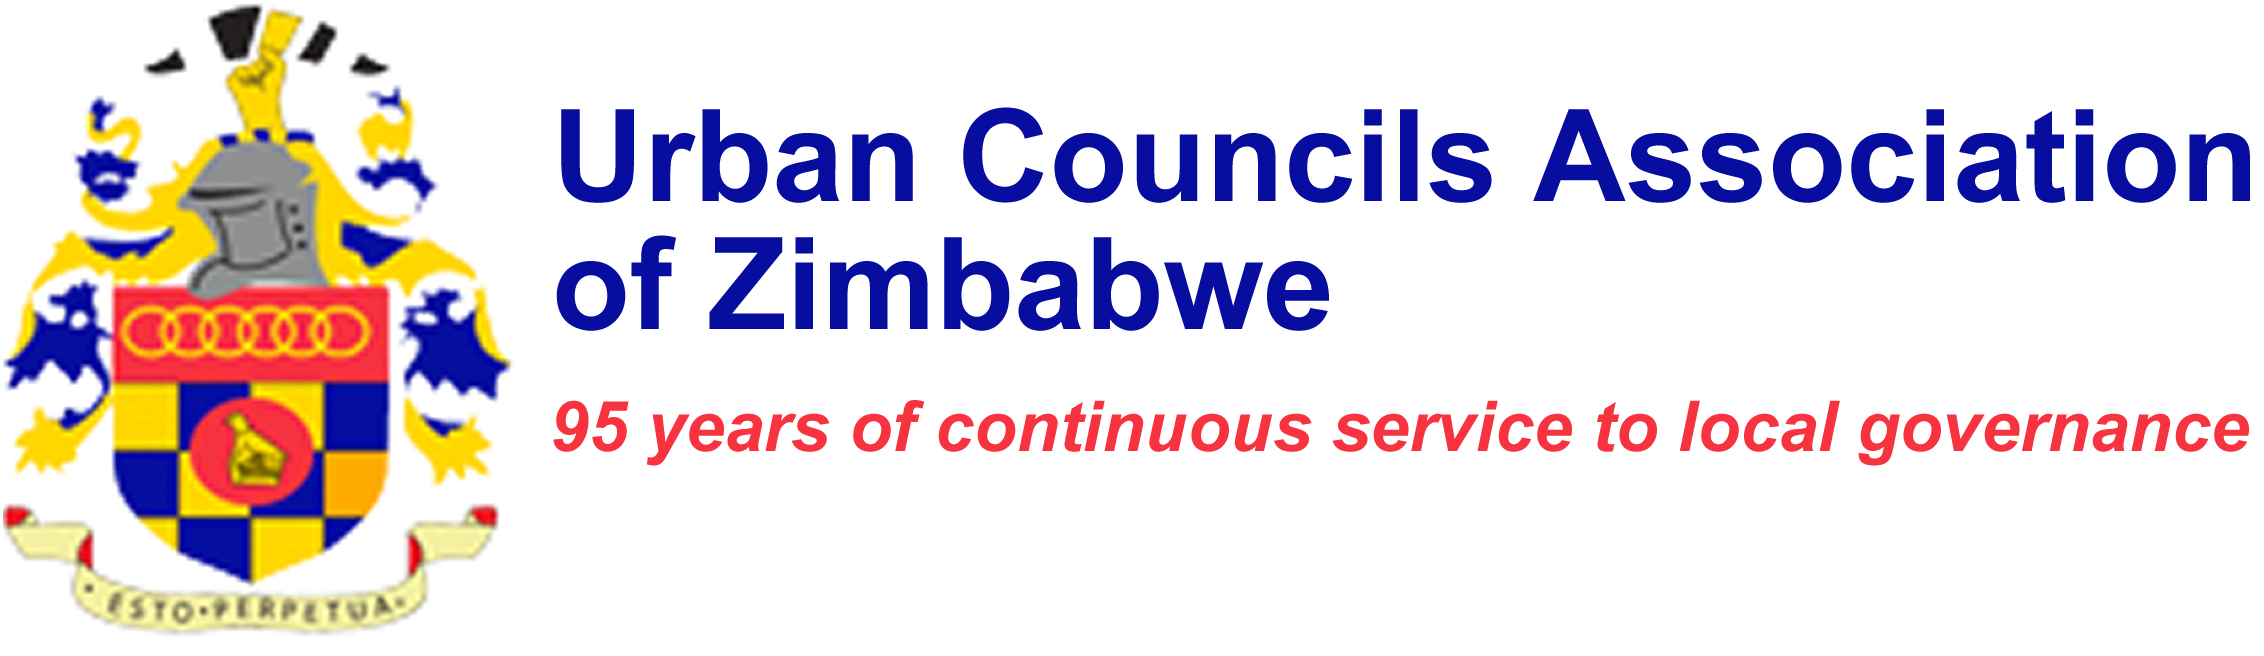 Councillors demand monthly salaries